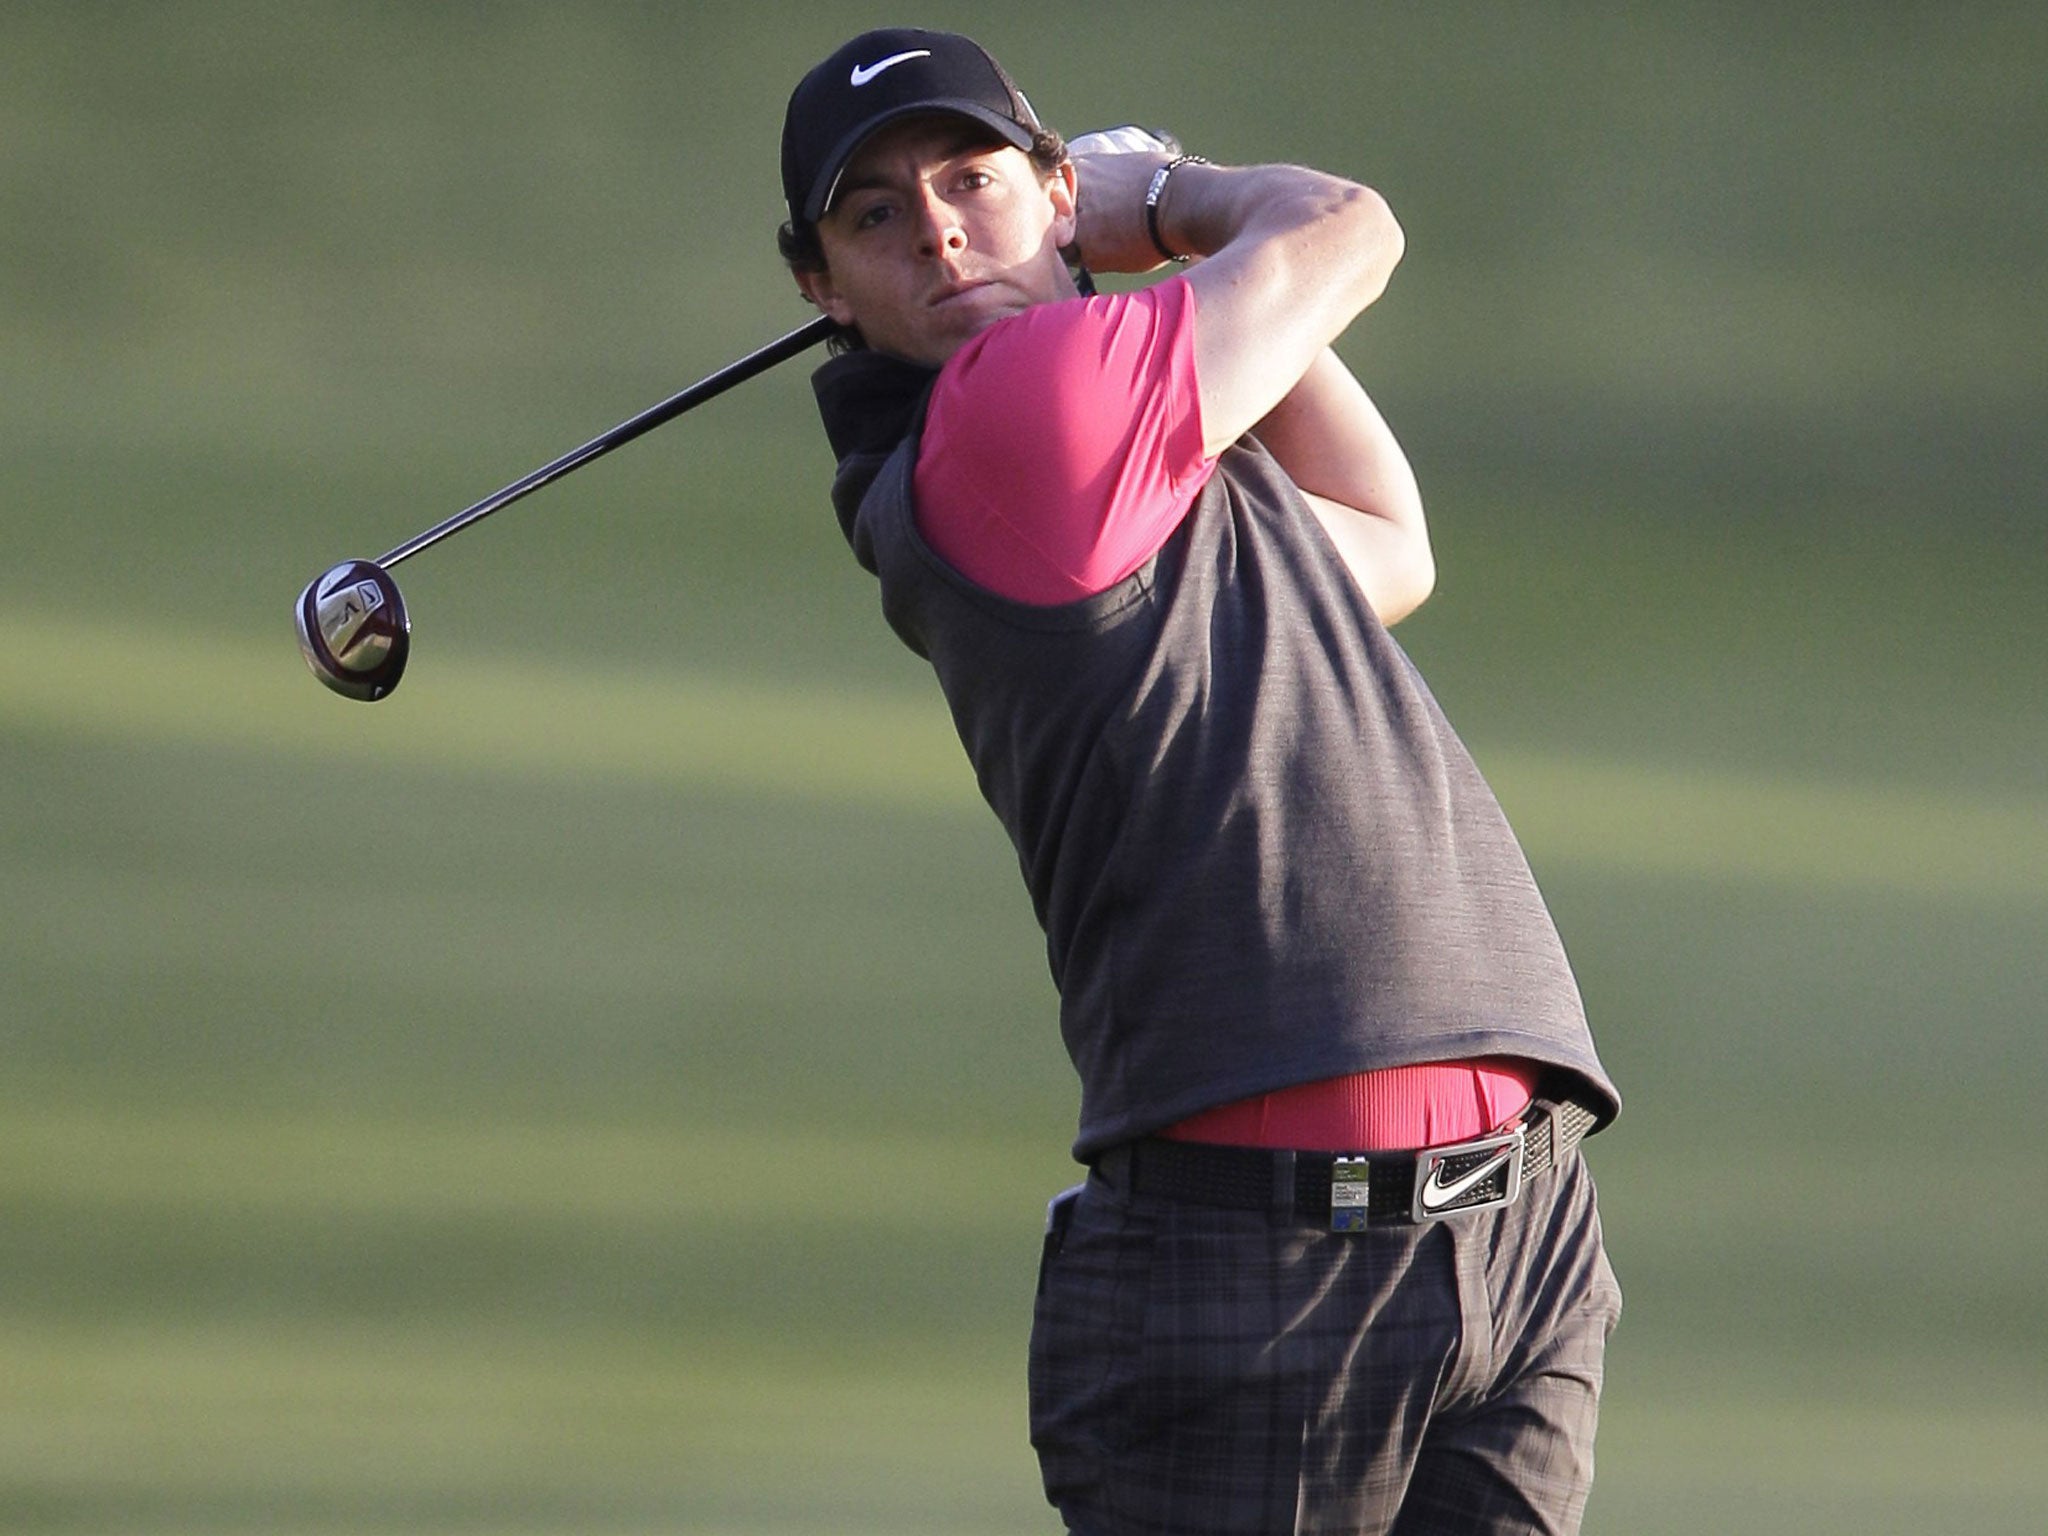 Rory McIlroy struggled with his new Nike equipment in Abu Dhabi